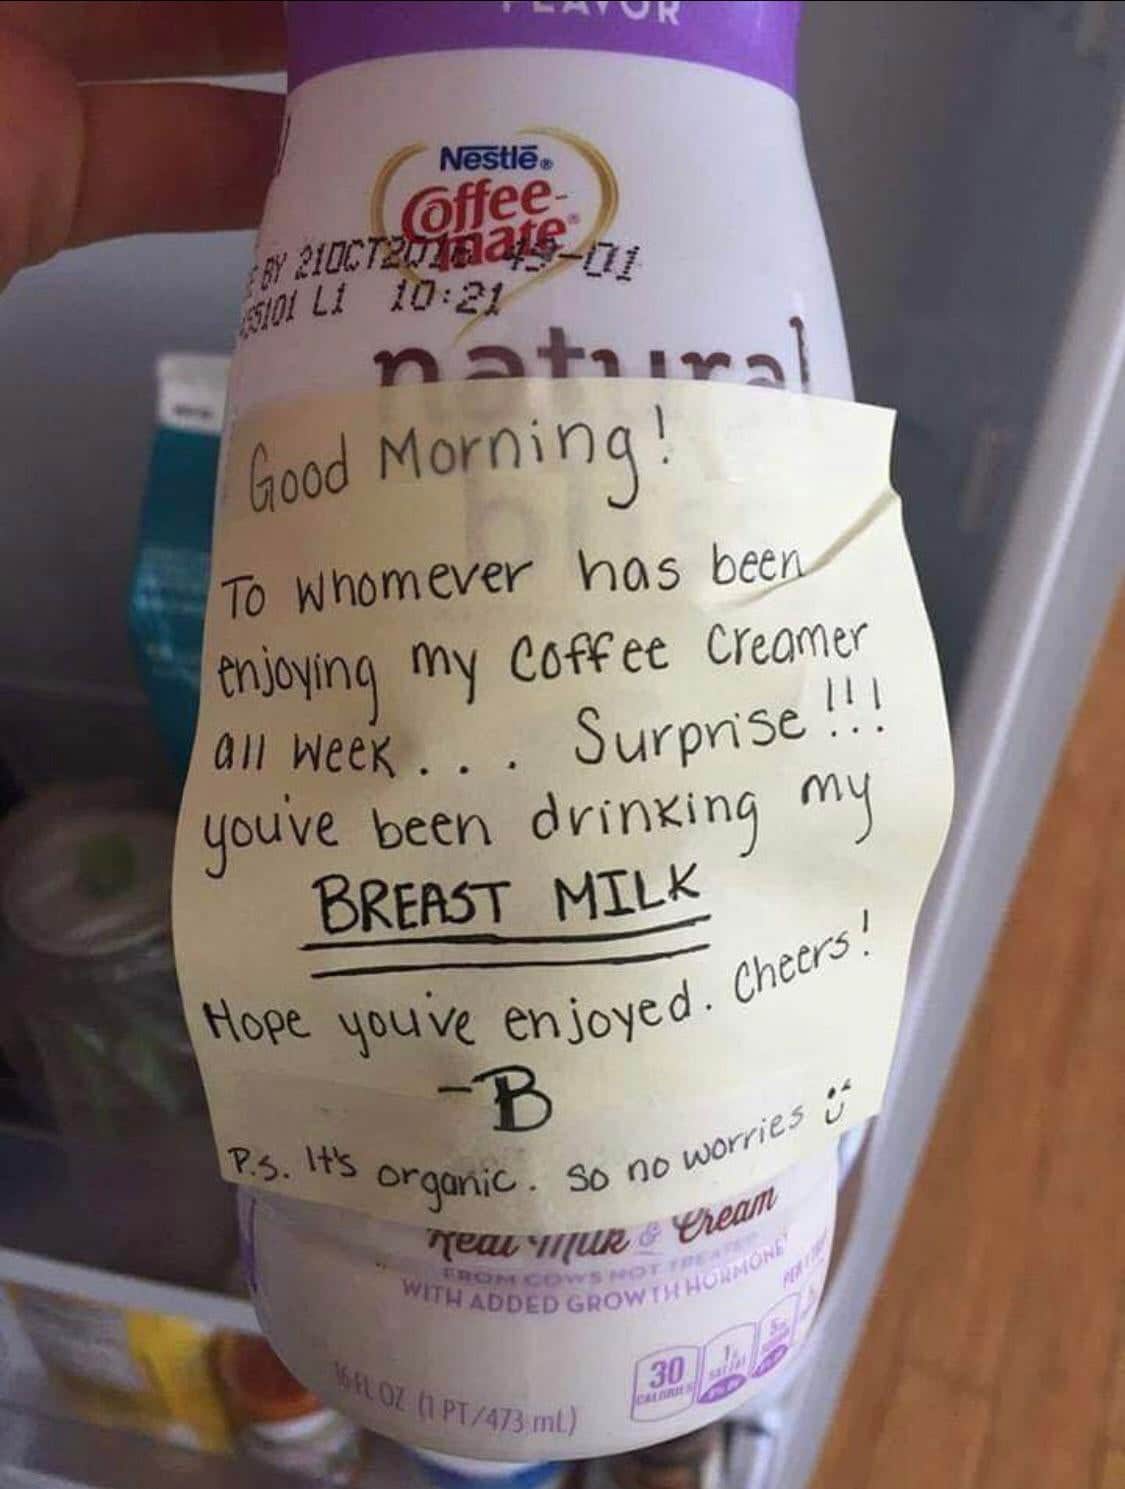 breast milk office fridge - With Added Growth Hormoney Lol 11 Pt473 mL Nestl. B 210CT201801 Hope you've enjoyed. Cheers! Ps. It's organic. So no worries is Tea Wur & Cream offee s101 L natural Good Morning! To whomever has been enjoying my Coffee creamer 